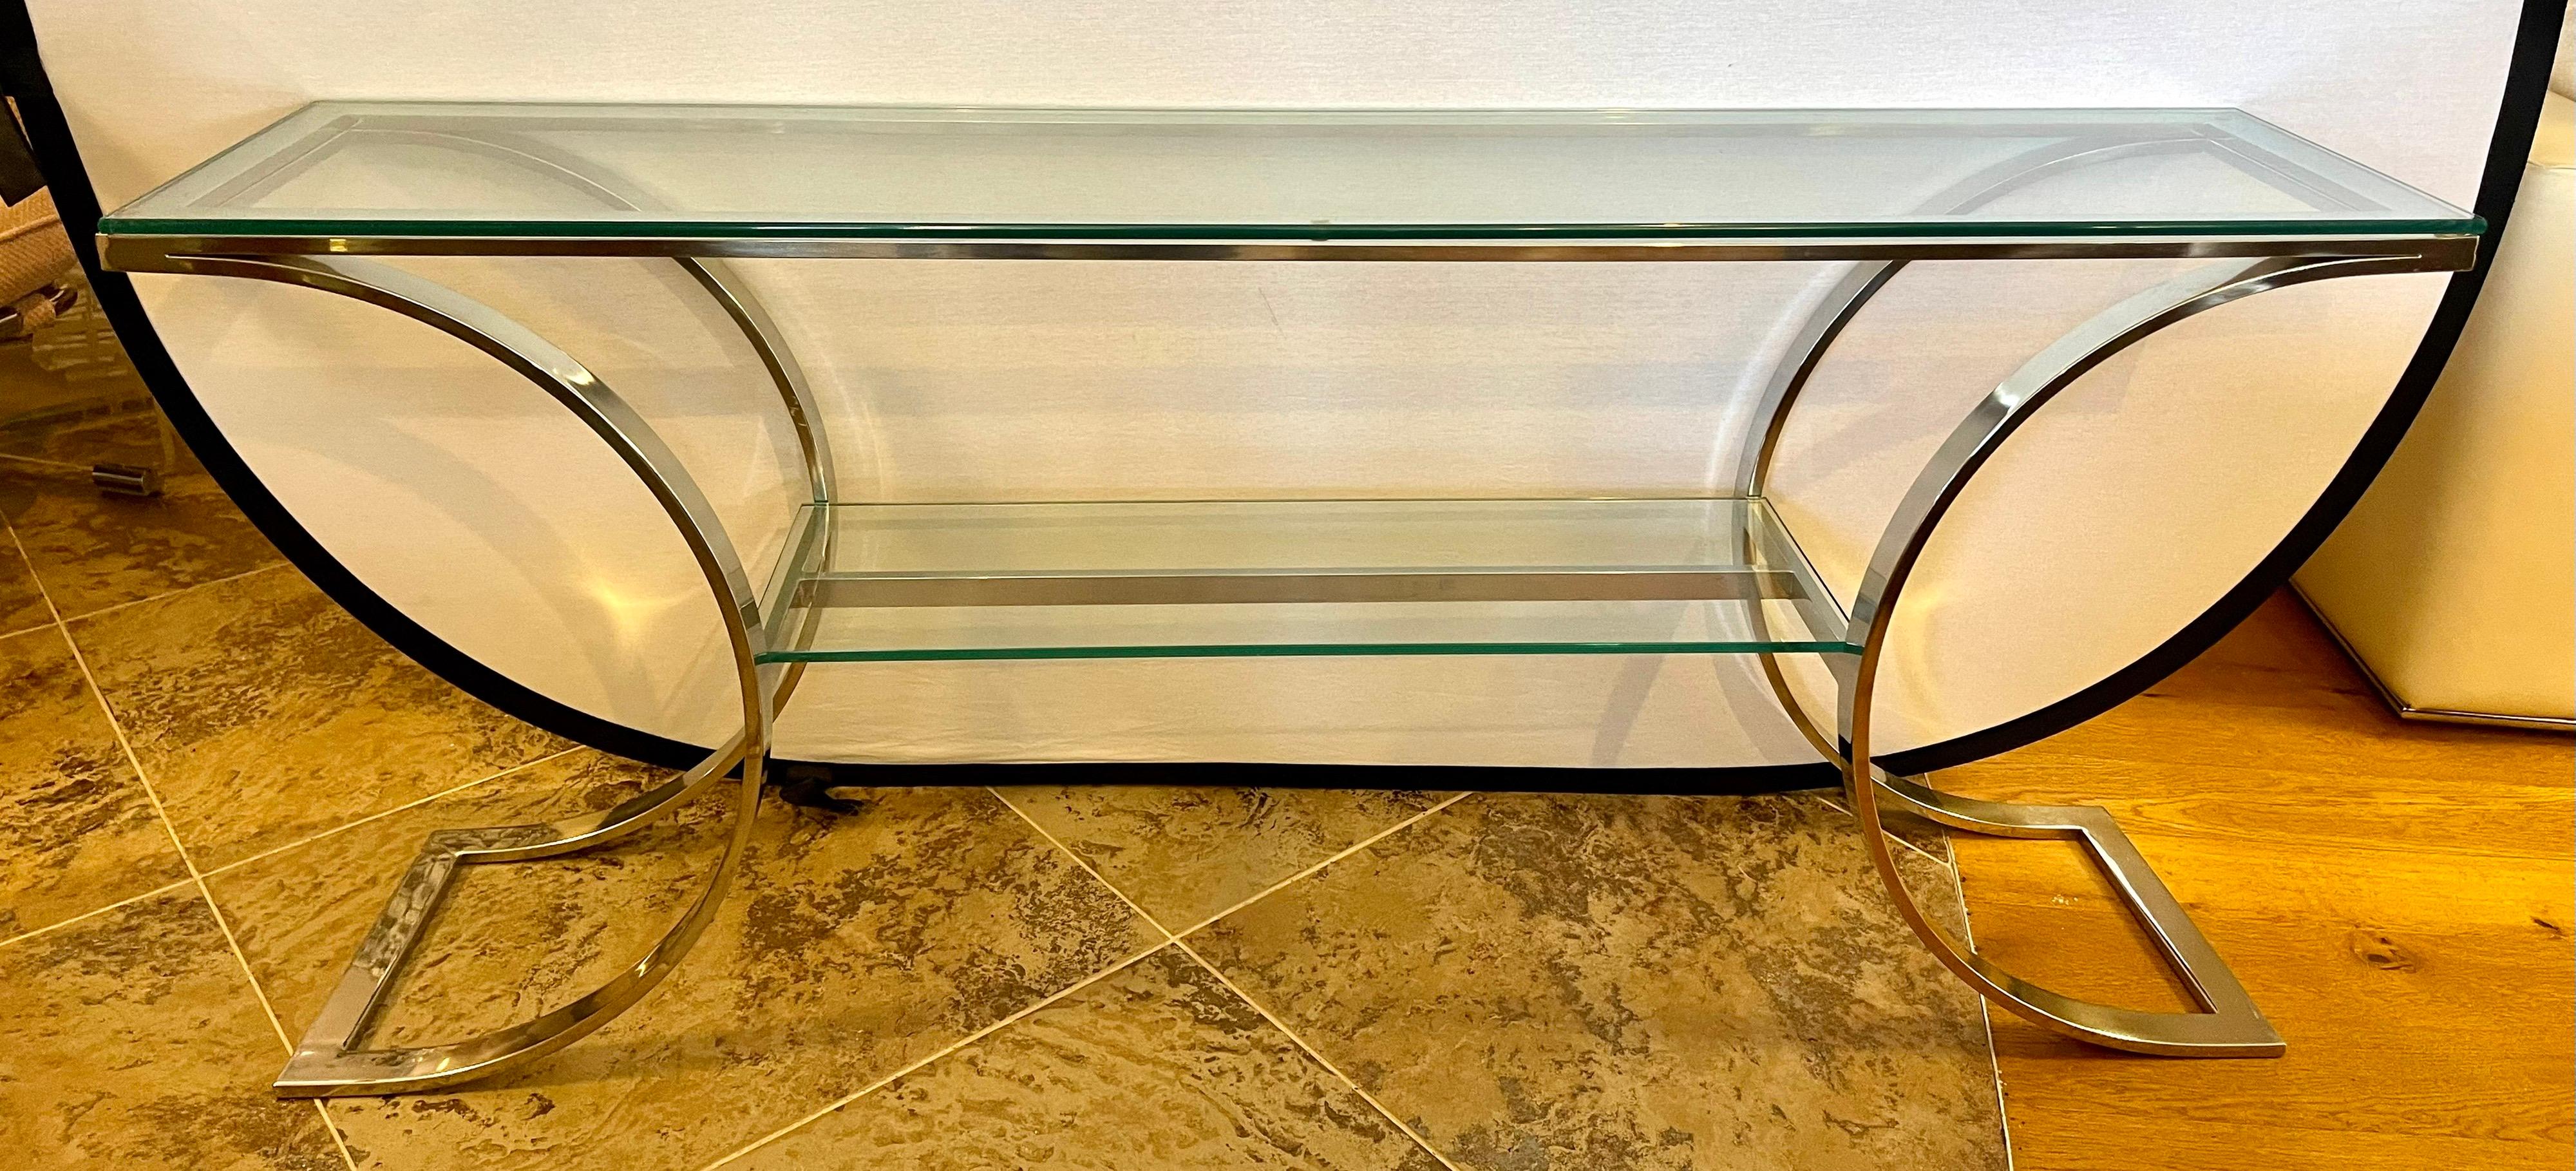 Magnificent Milo Baughman glass top with chrome base console table.
Sculptural base with two levels of glass make this piece look like a sculpture. Nothing short of gorgeous. Glass top is made of thick glass as one would expect. Iconic mid century